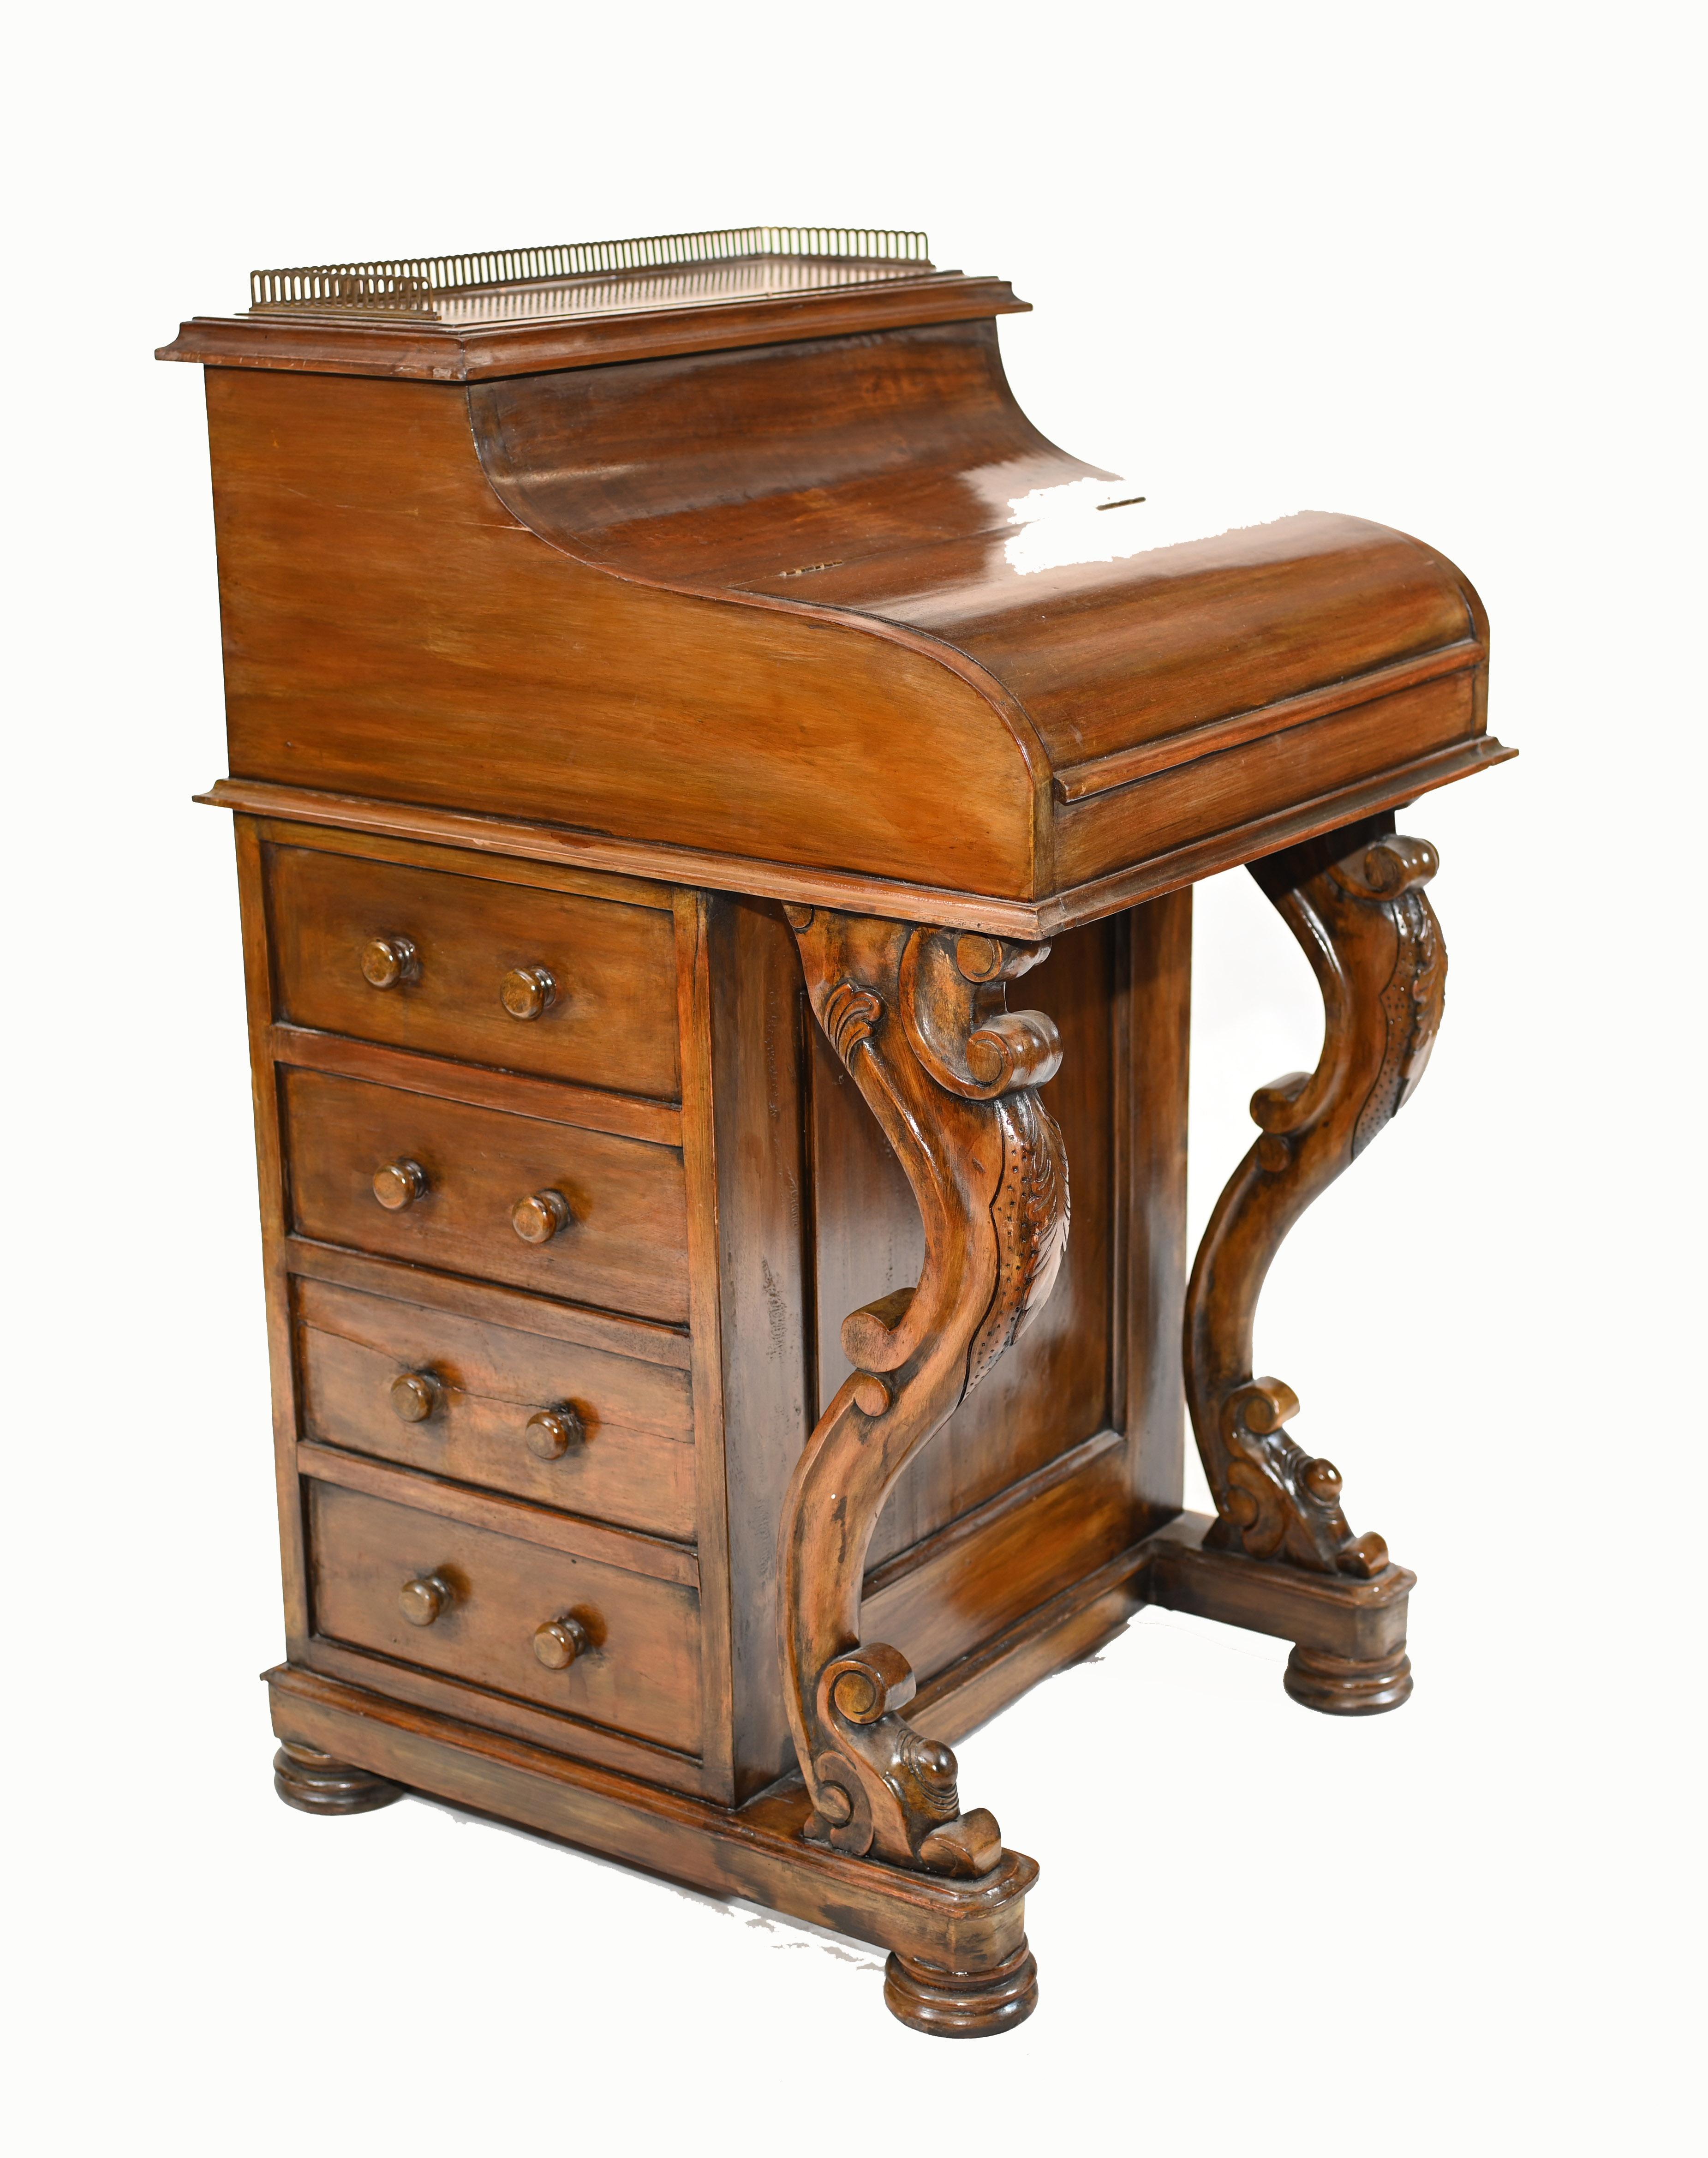 
Gorgeous Victorian Davenport desk we date to circa 1880
Hand crafted in mahogany it features a pop up mechanism 
Top opens out to reveal writing surface and numerous cubby holes
Offered in great shape ready for home use right away
We ship to every